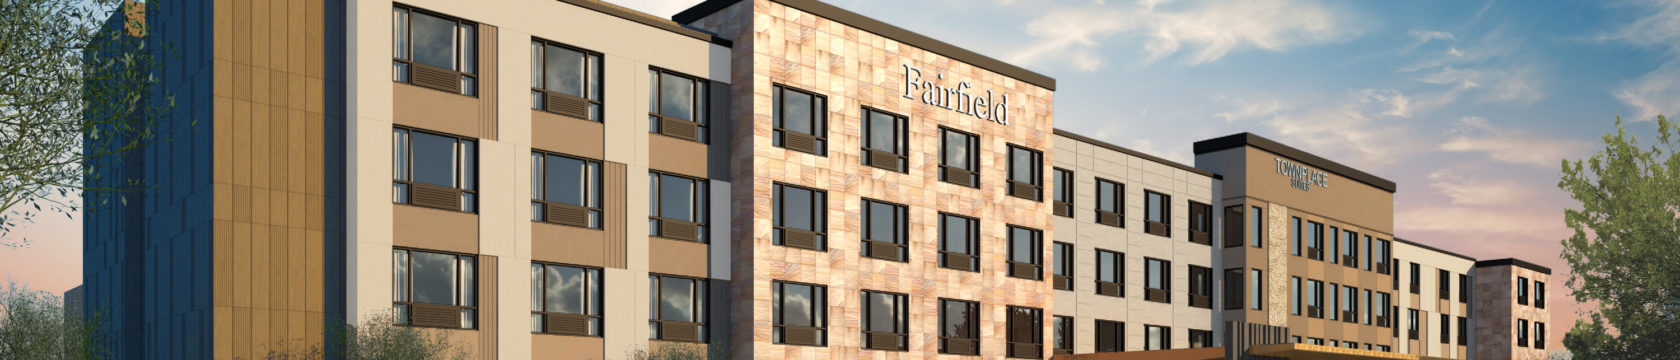 Fairfield Inn And Towneplace Suites